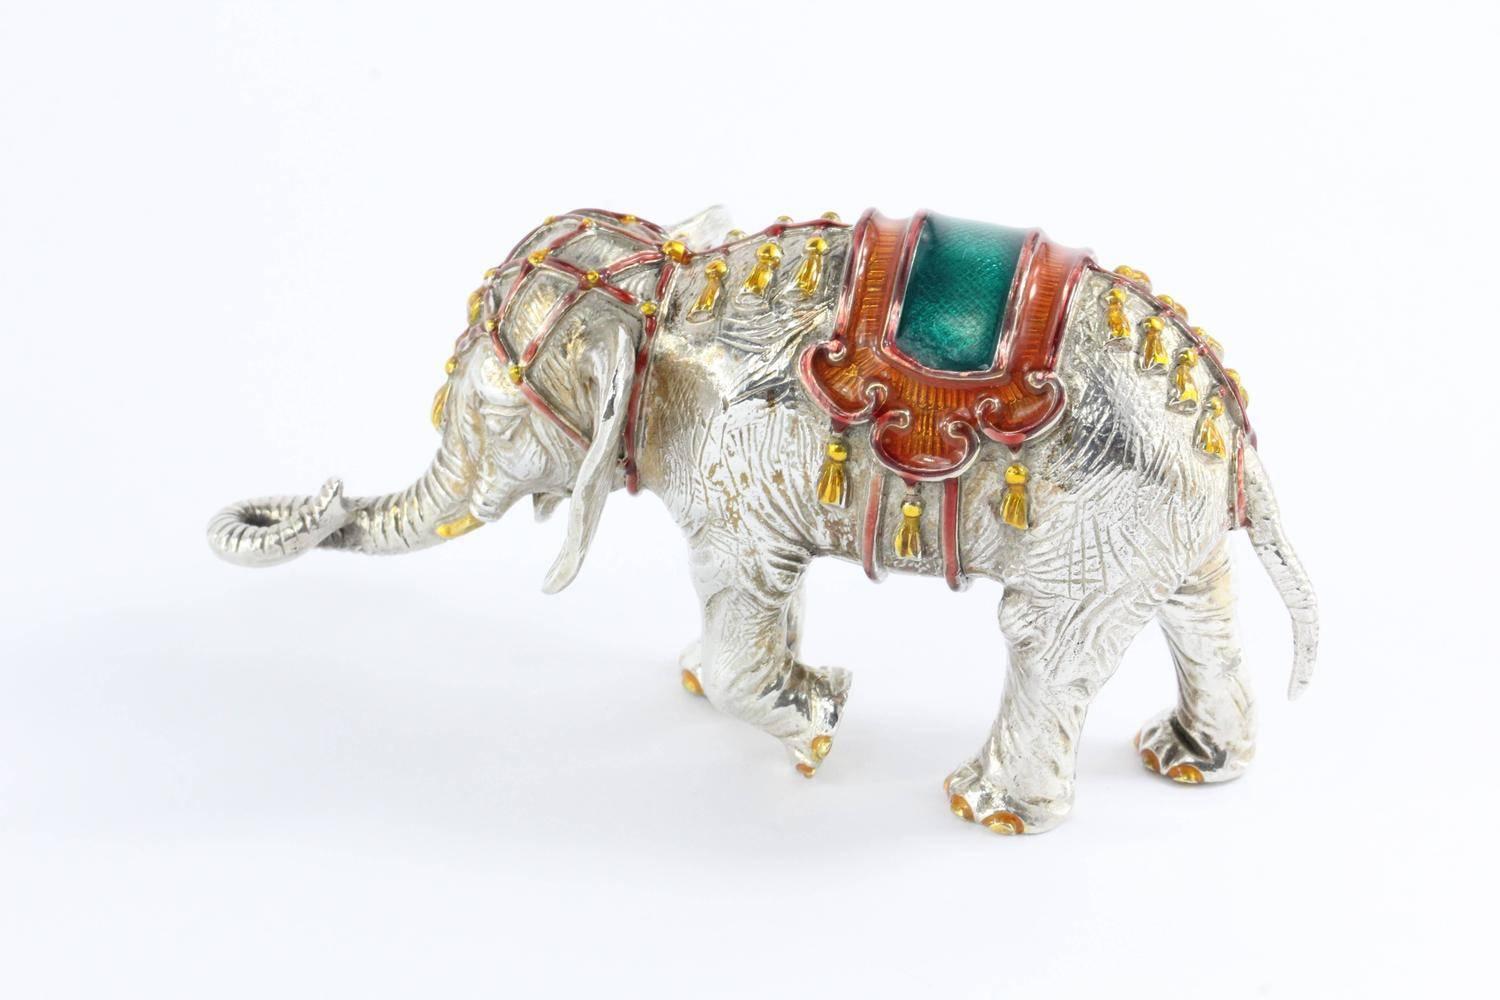 A beautifully enameled sterling silver circus figurine of a baby elephant; designed by Gene Moore for Tiffany & Co in New York. Marked “Tiffany & Co. 925 Sterling.” Approximate length: 4.375 inches and approximate height 2.31 inches. Weight of the